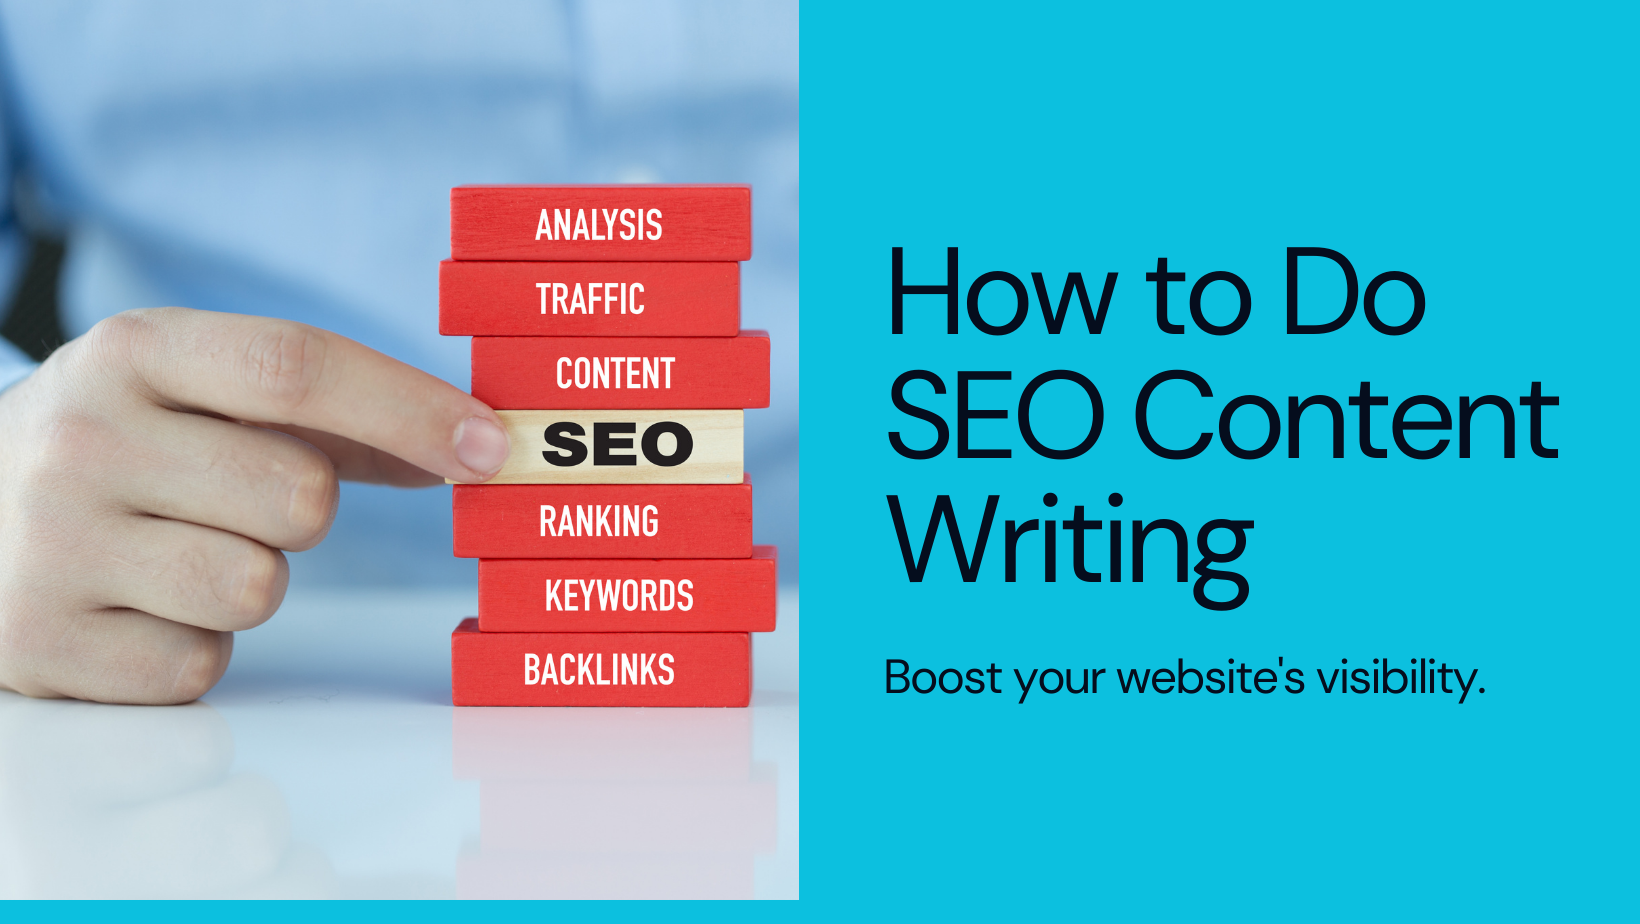 How to Do SEO Content Writing